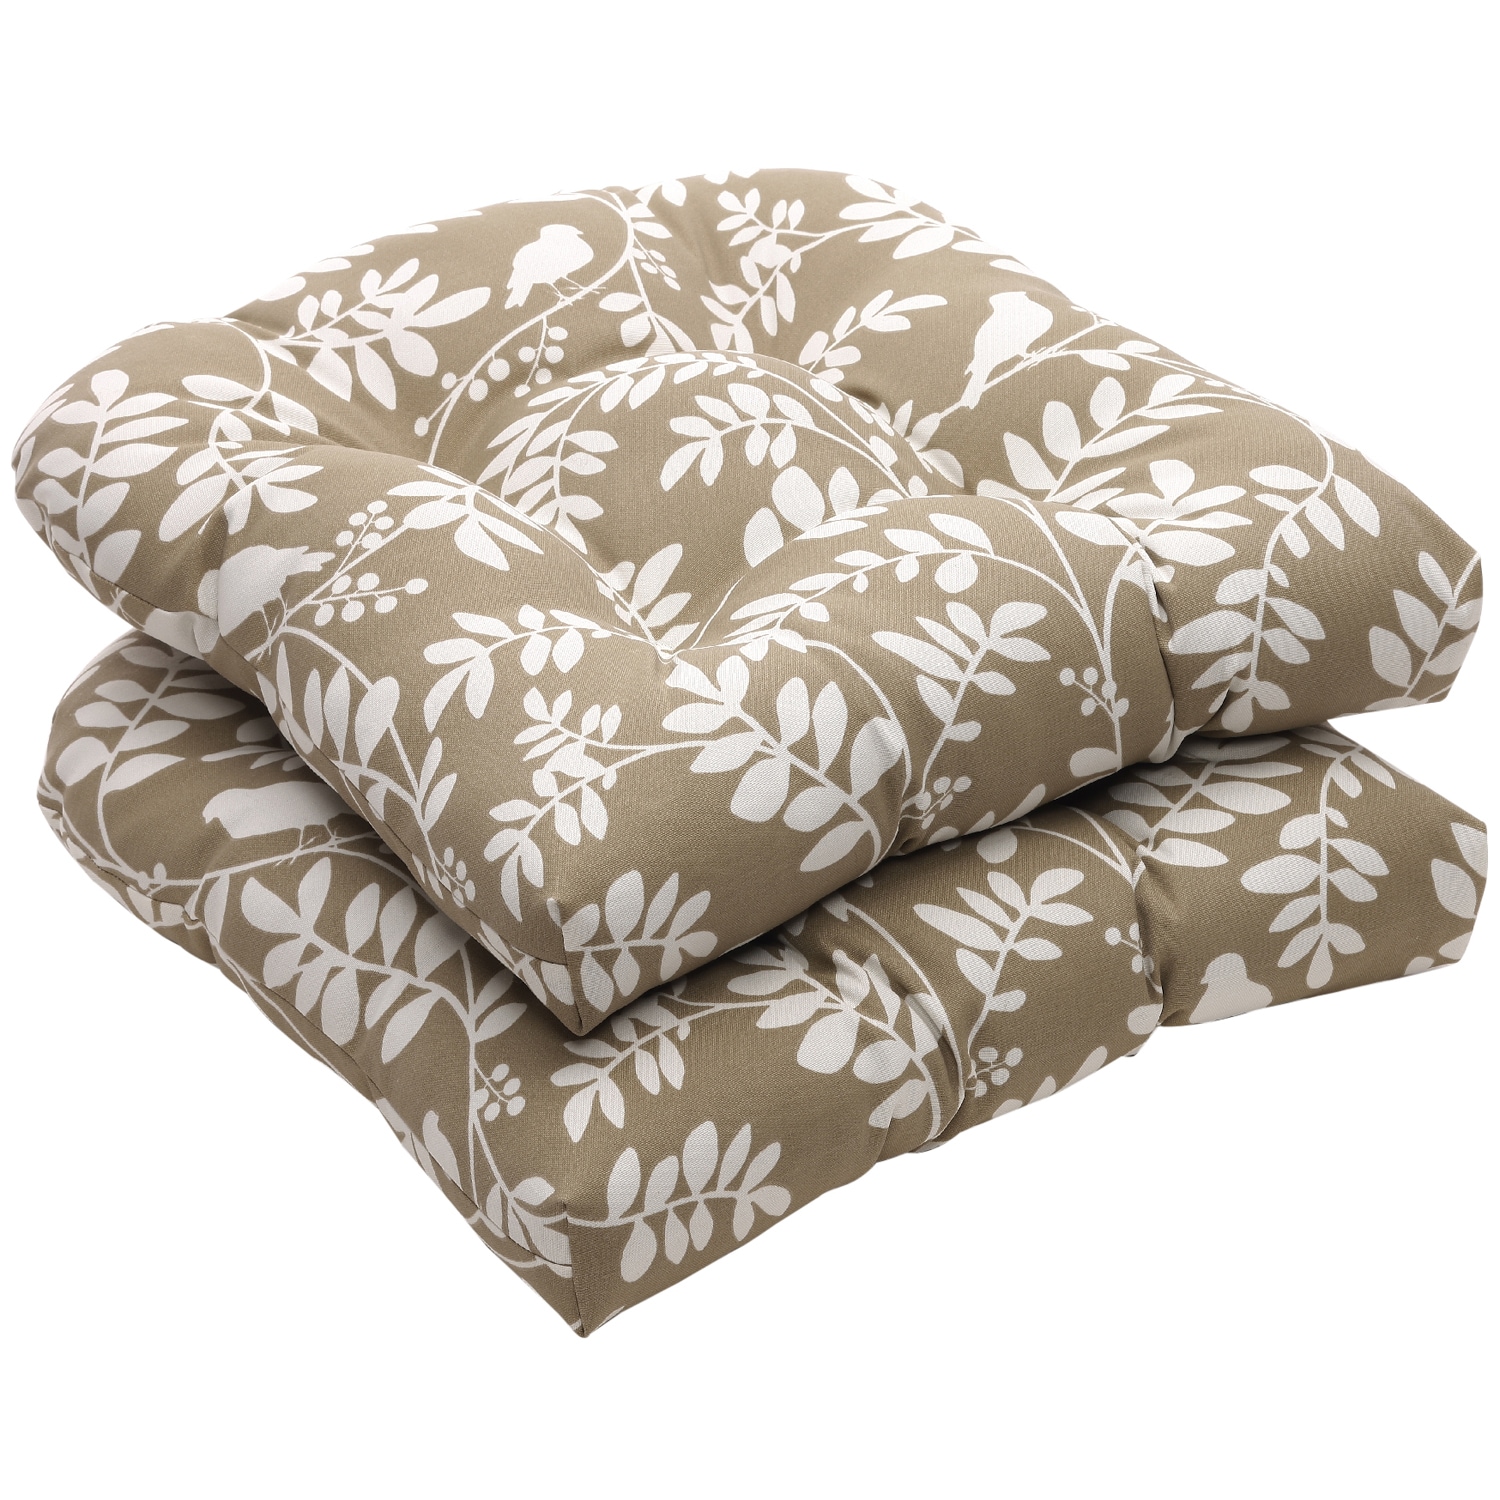 Outdoor Taupe Floral Wicker Seat Cushions (Set of 2) - 14095762